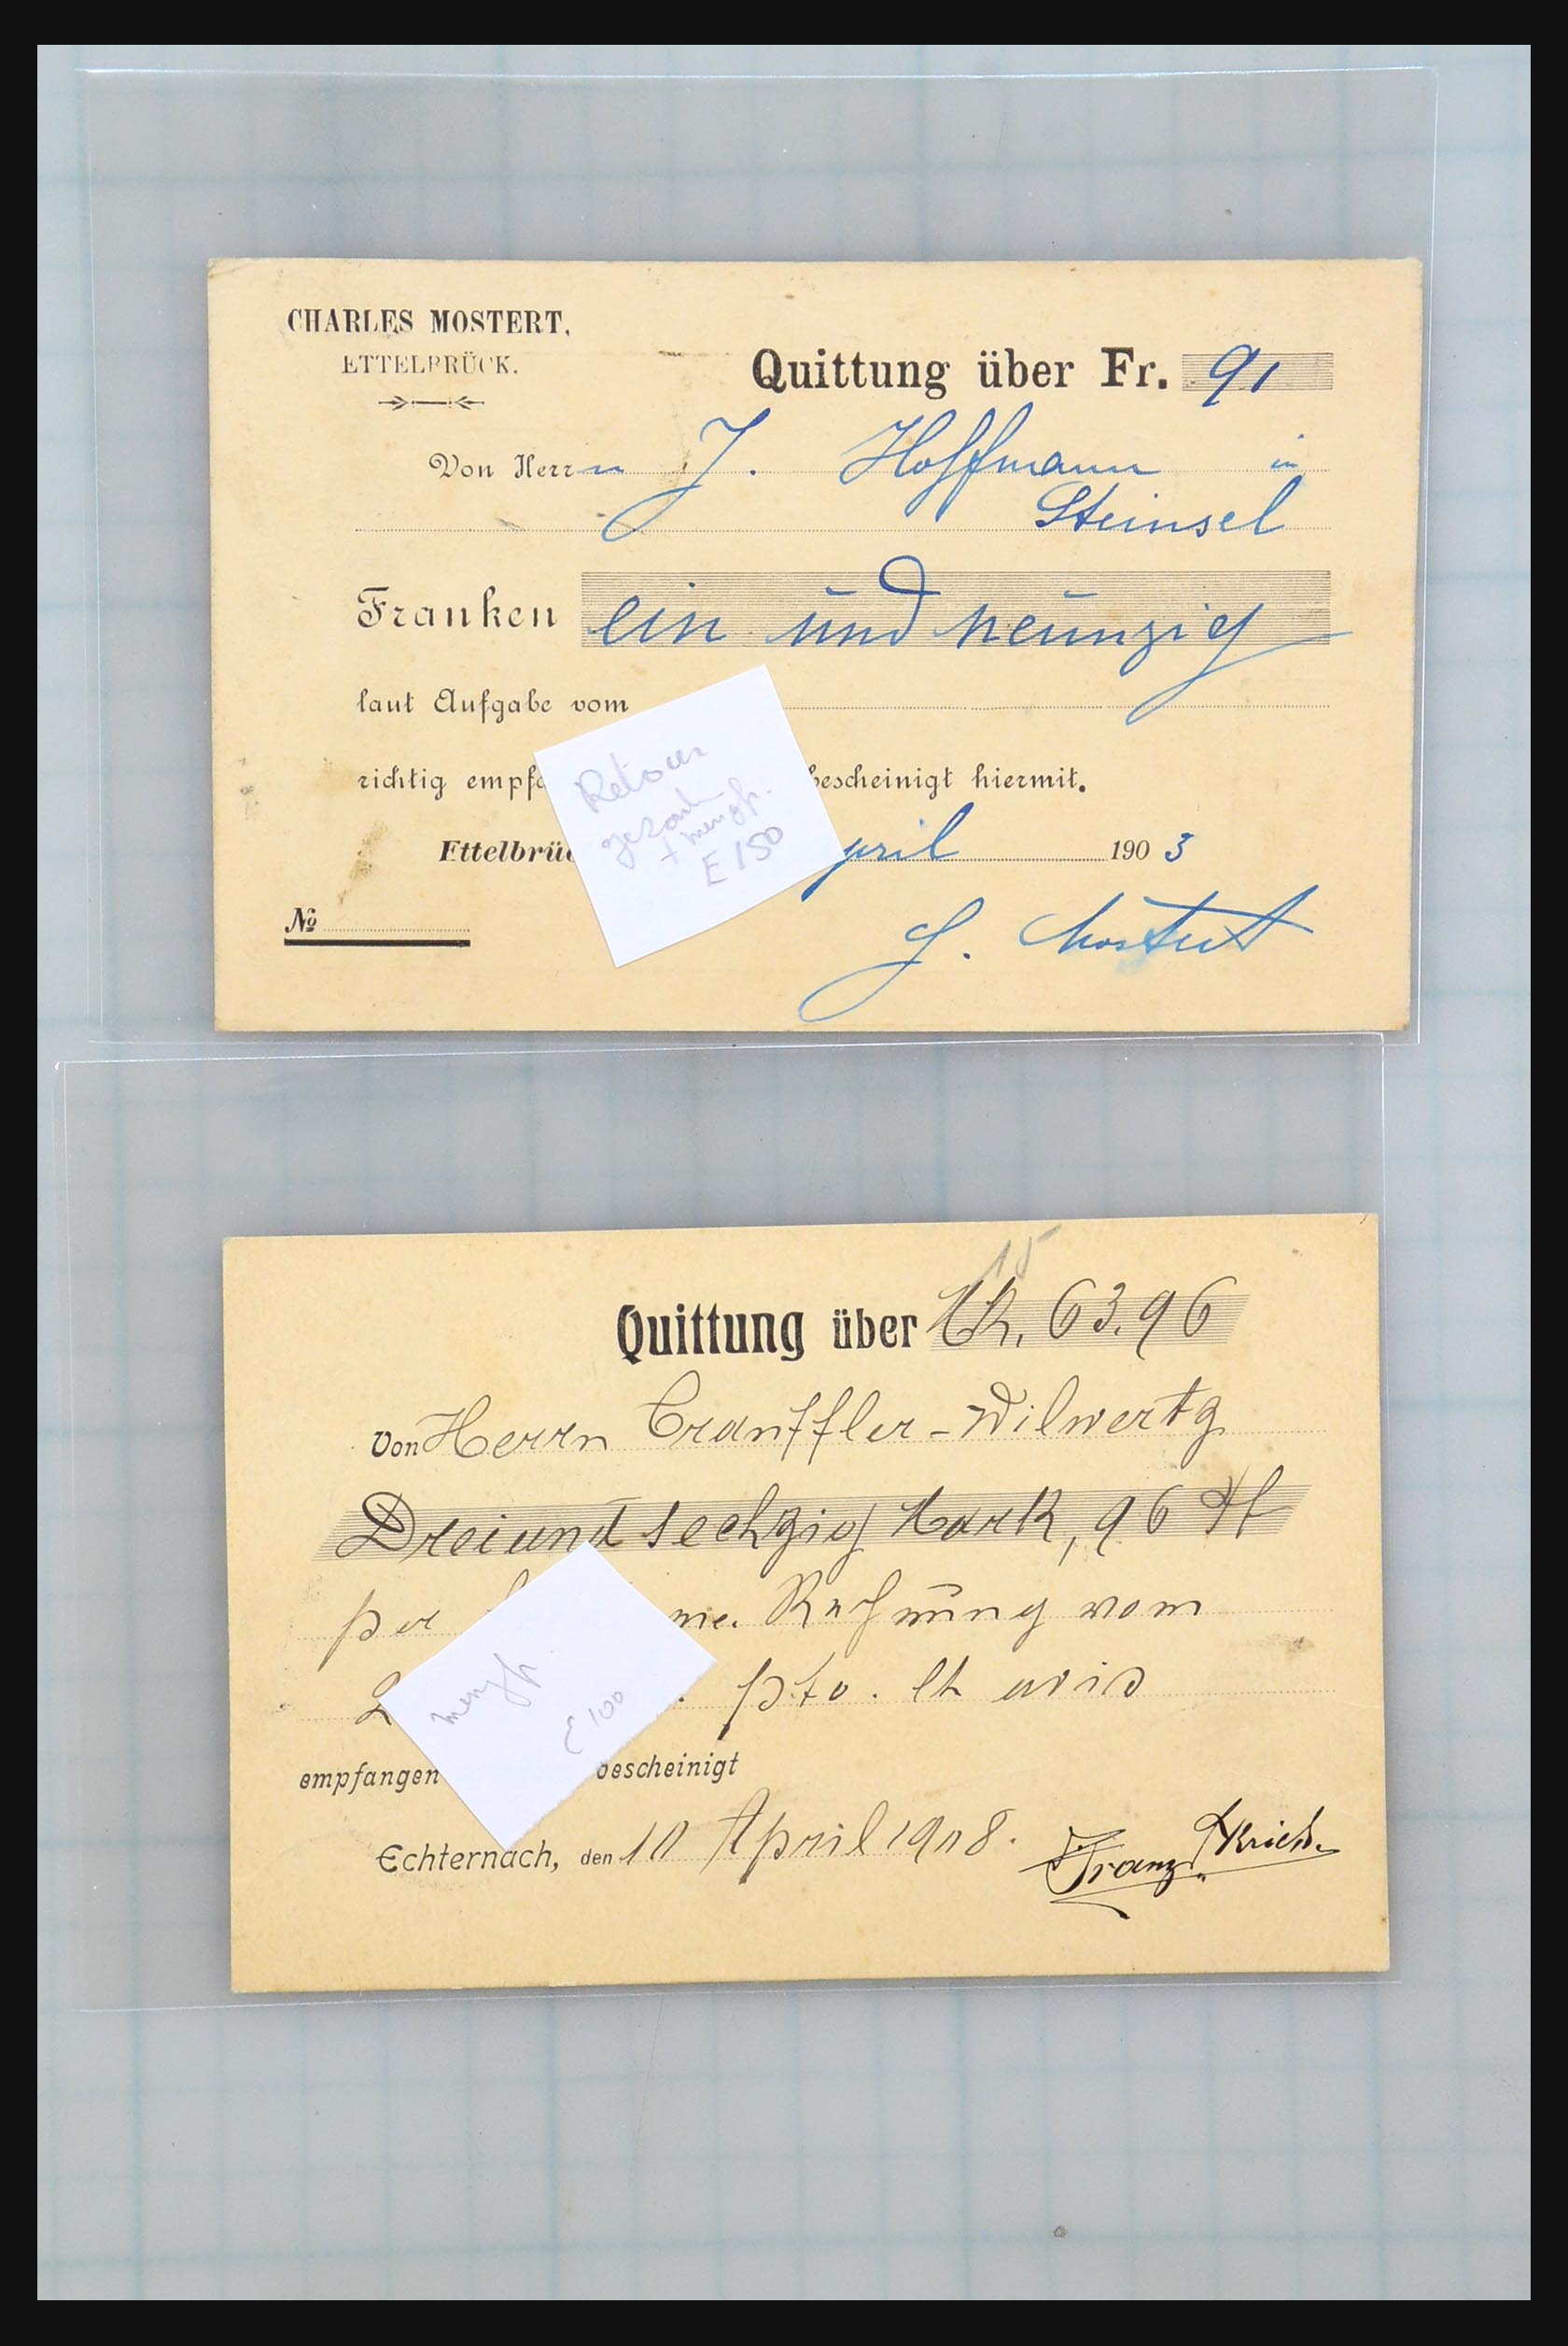 31358 047 - 31358 Portugal/Luxemburg/Greece covers 1880-1960.